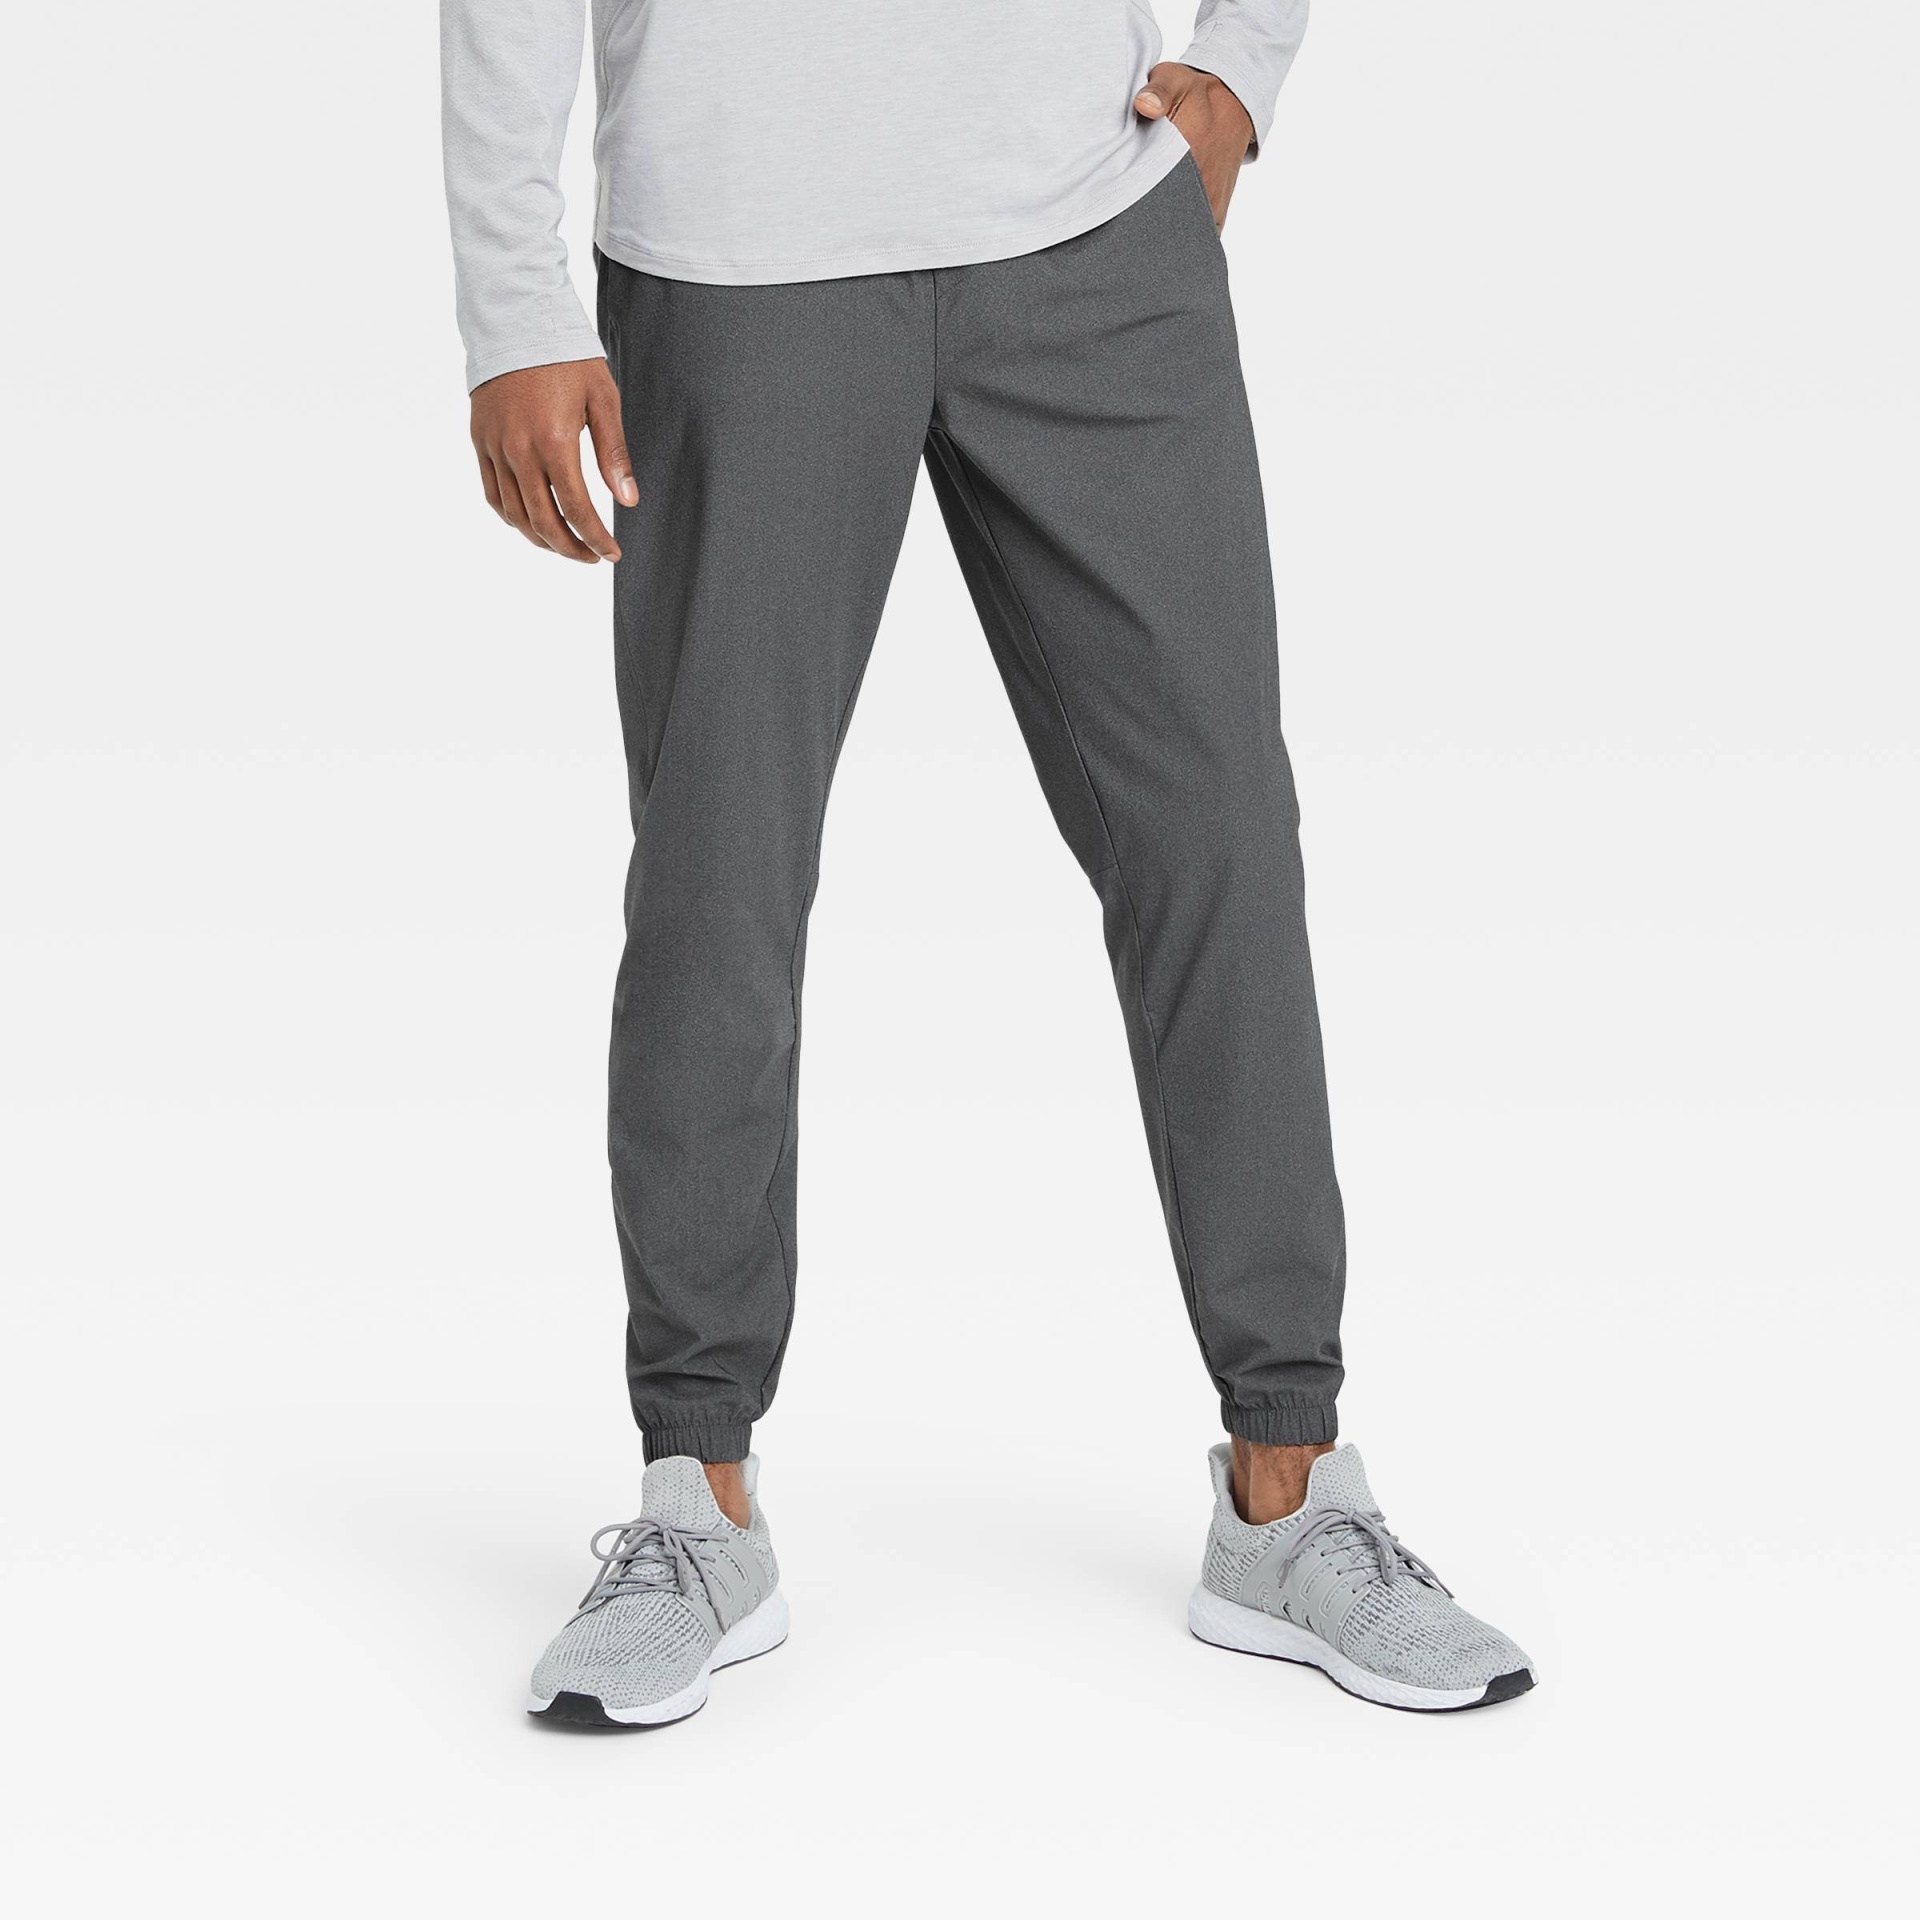 Men's Lightweight Run Pants - All in Motion Heathered Black S 1 ct